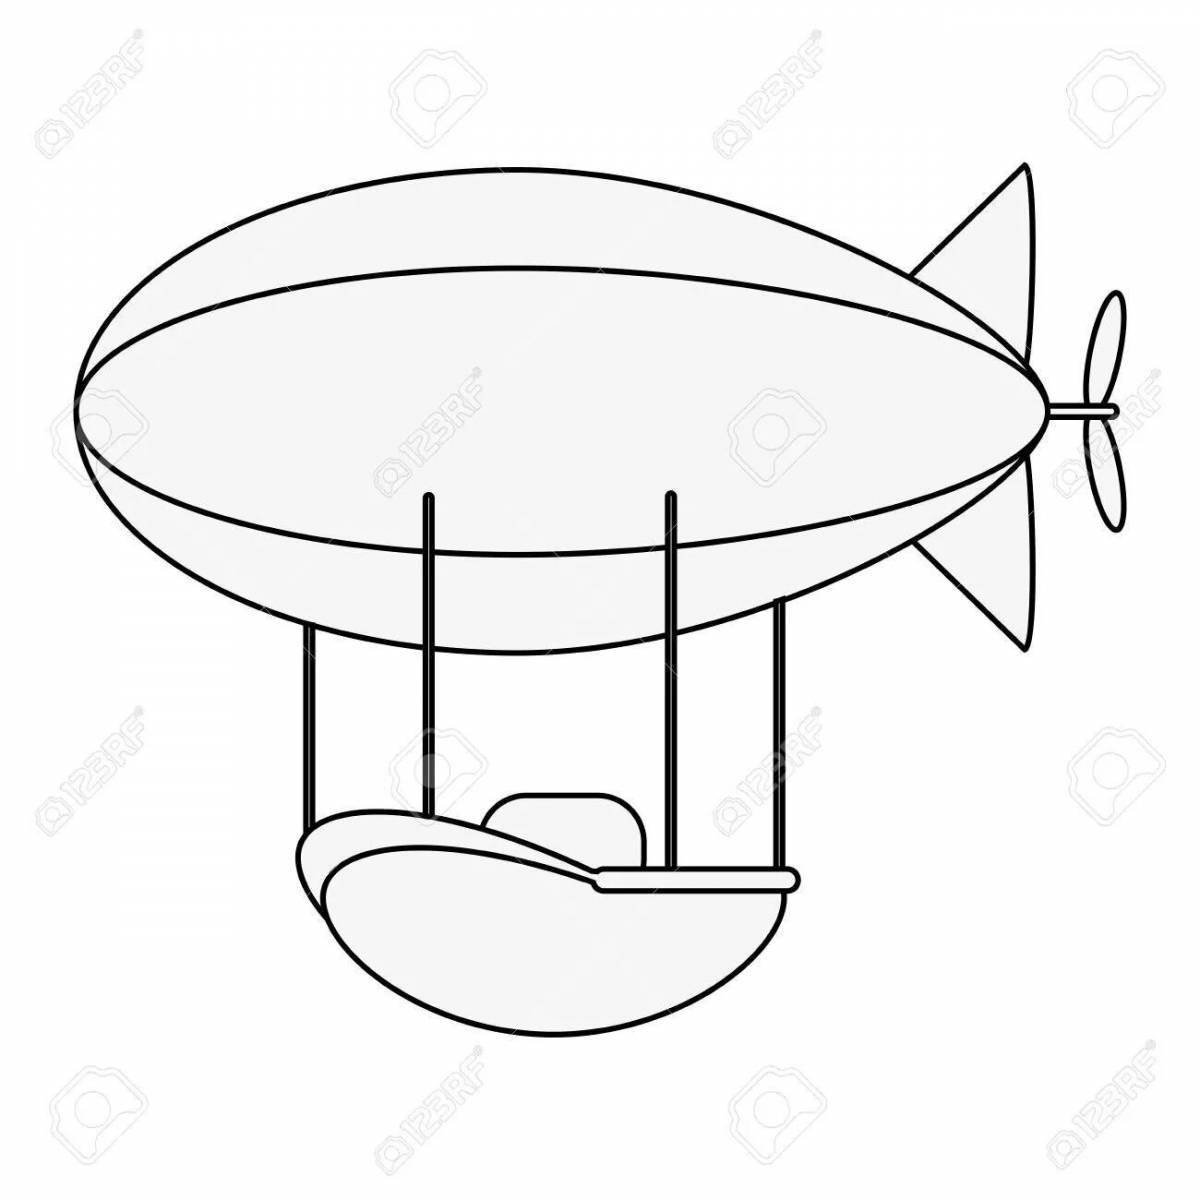 Beautiful airship coloring pages for kids